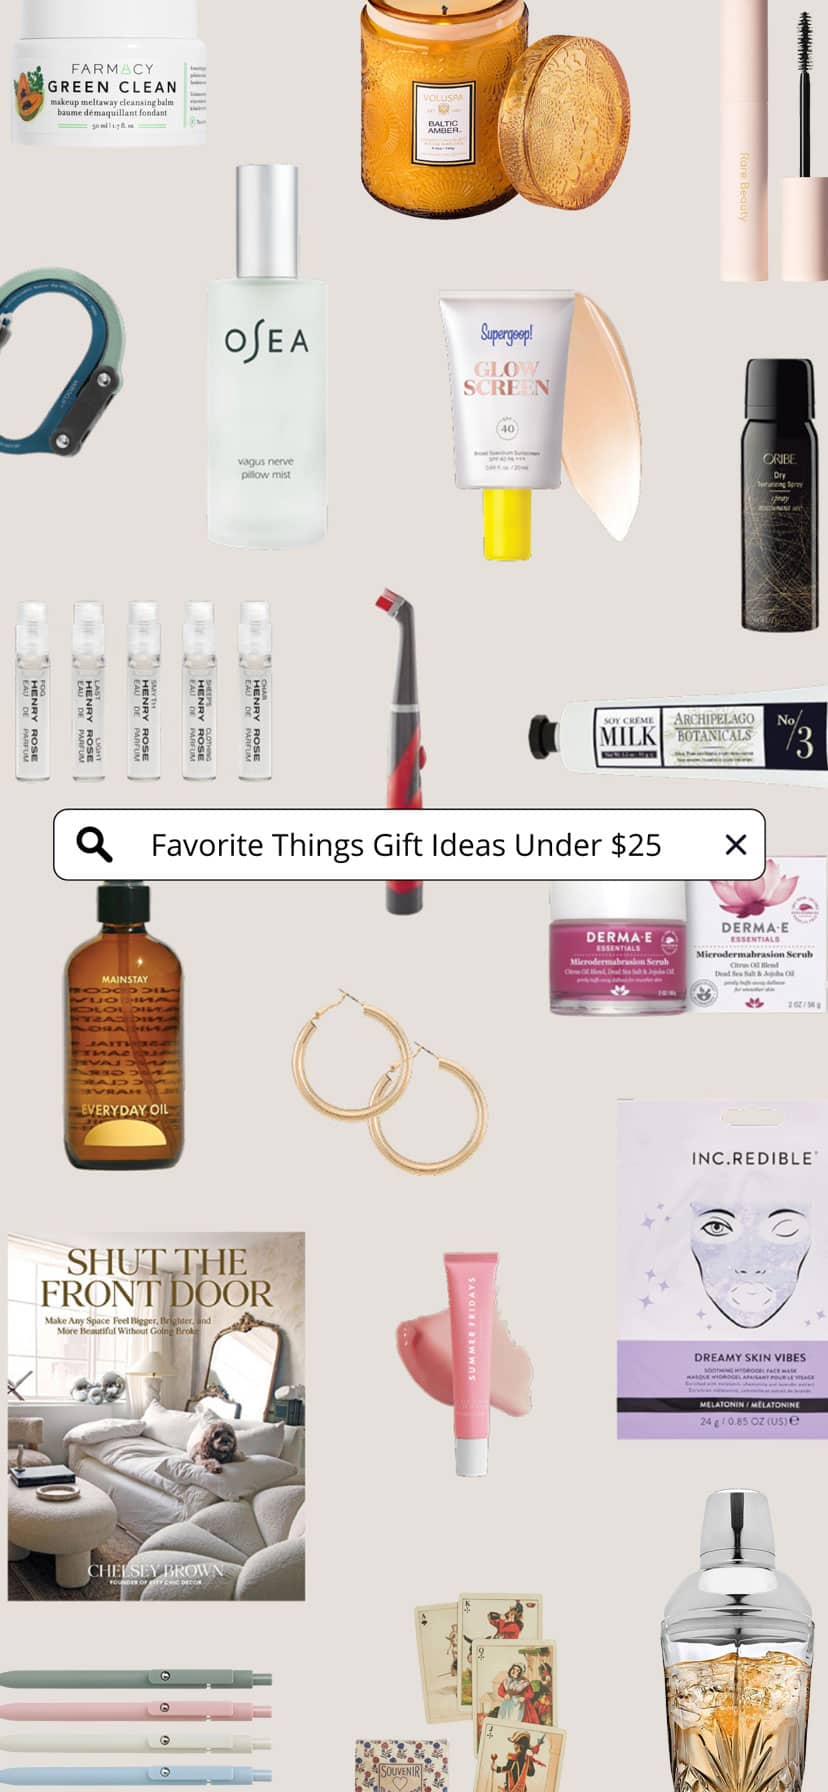 Under $25 Gifts for Her - By Lauren M